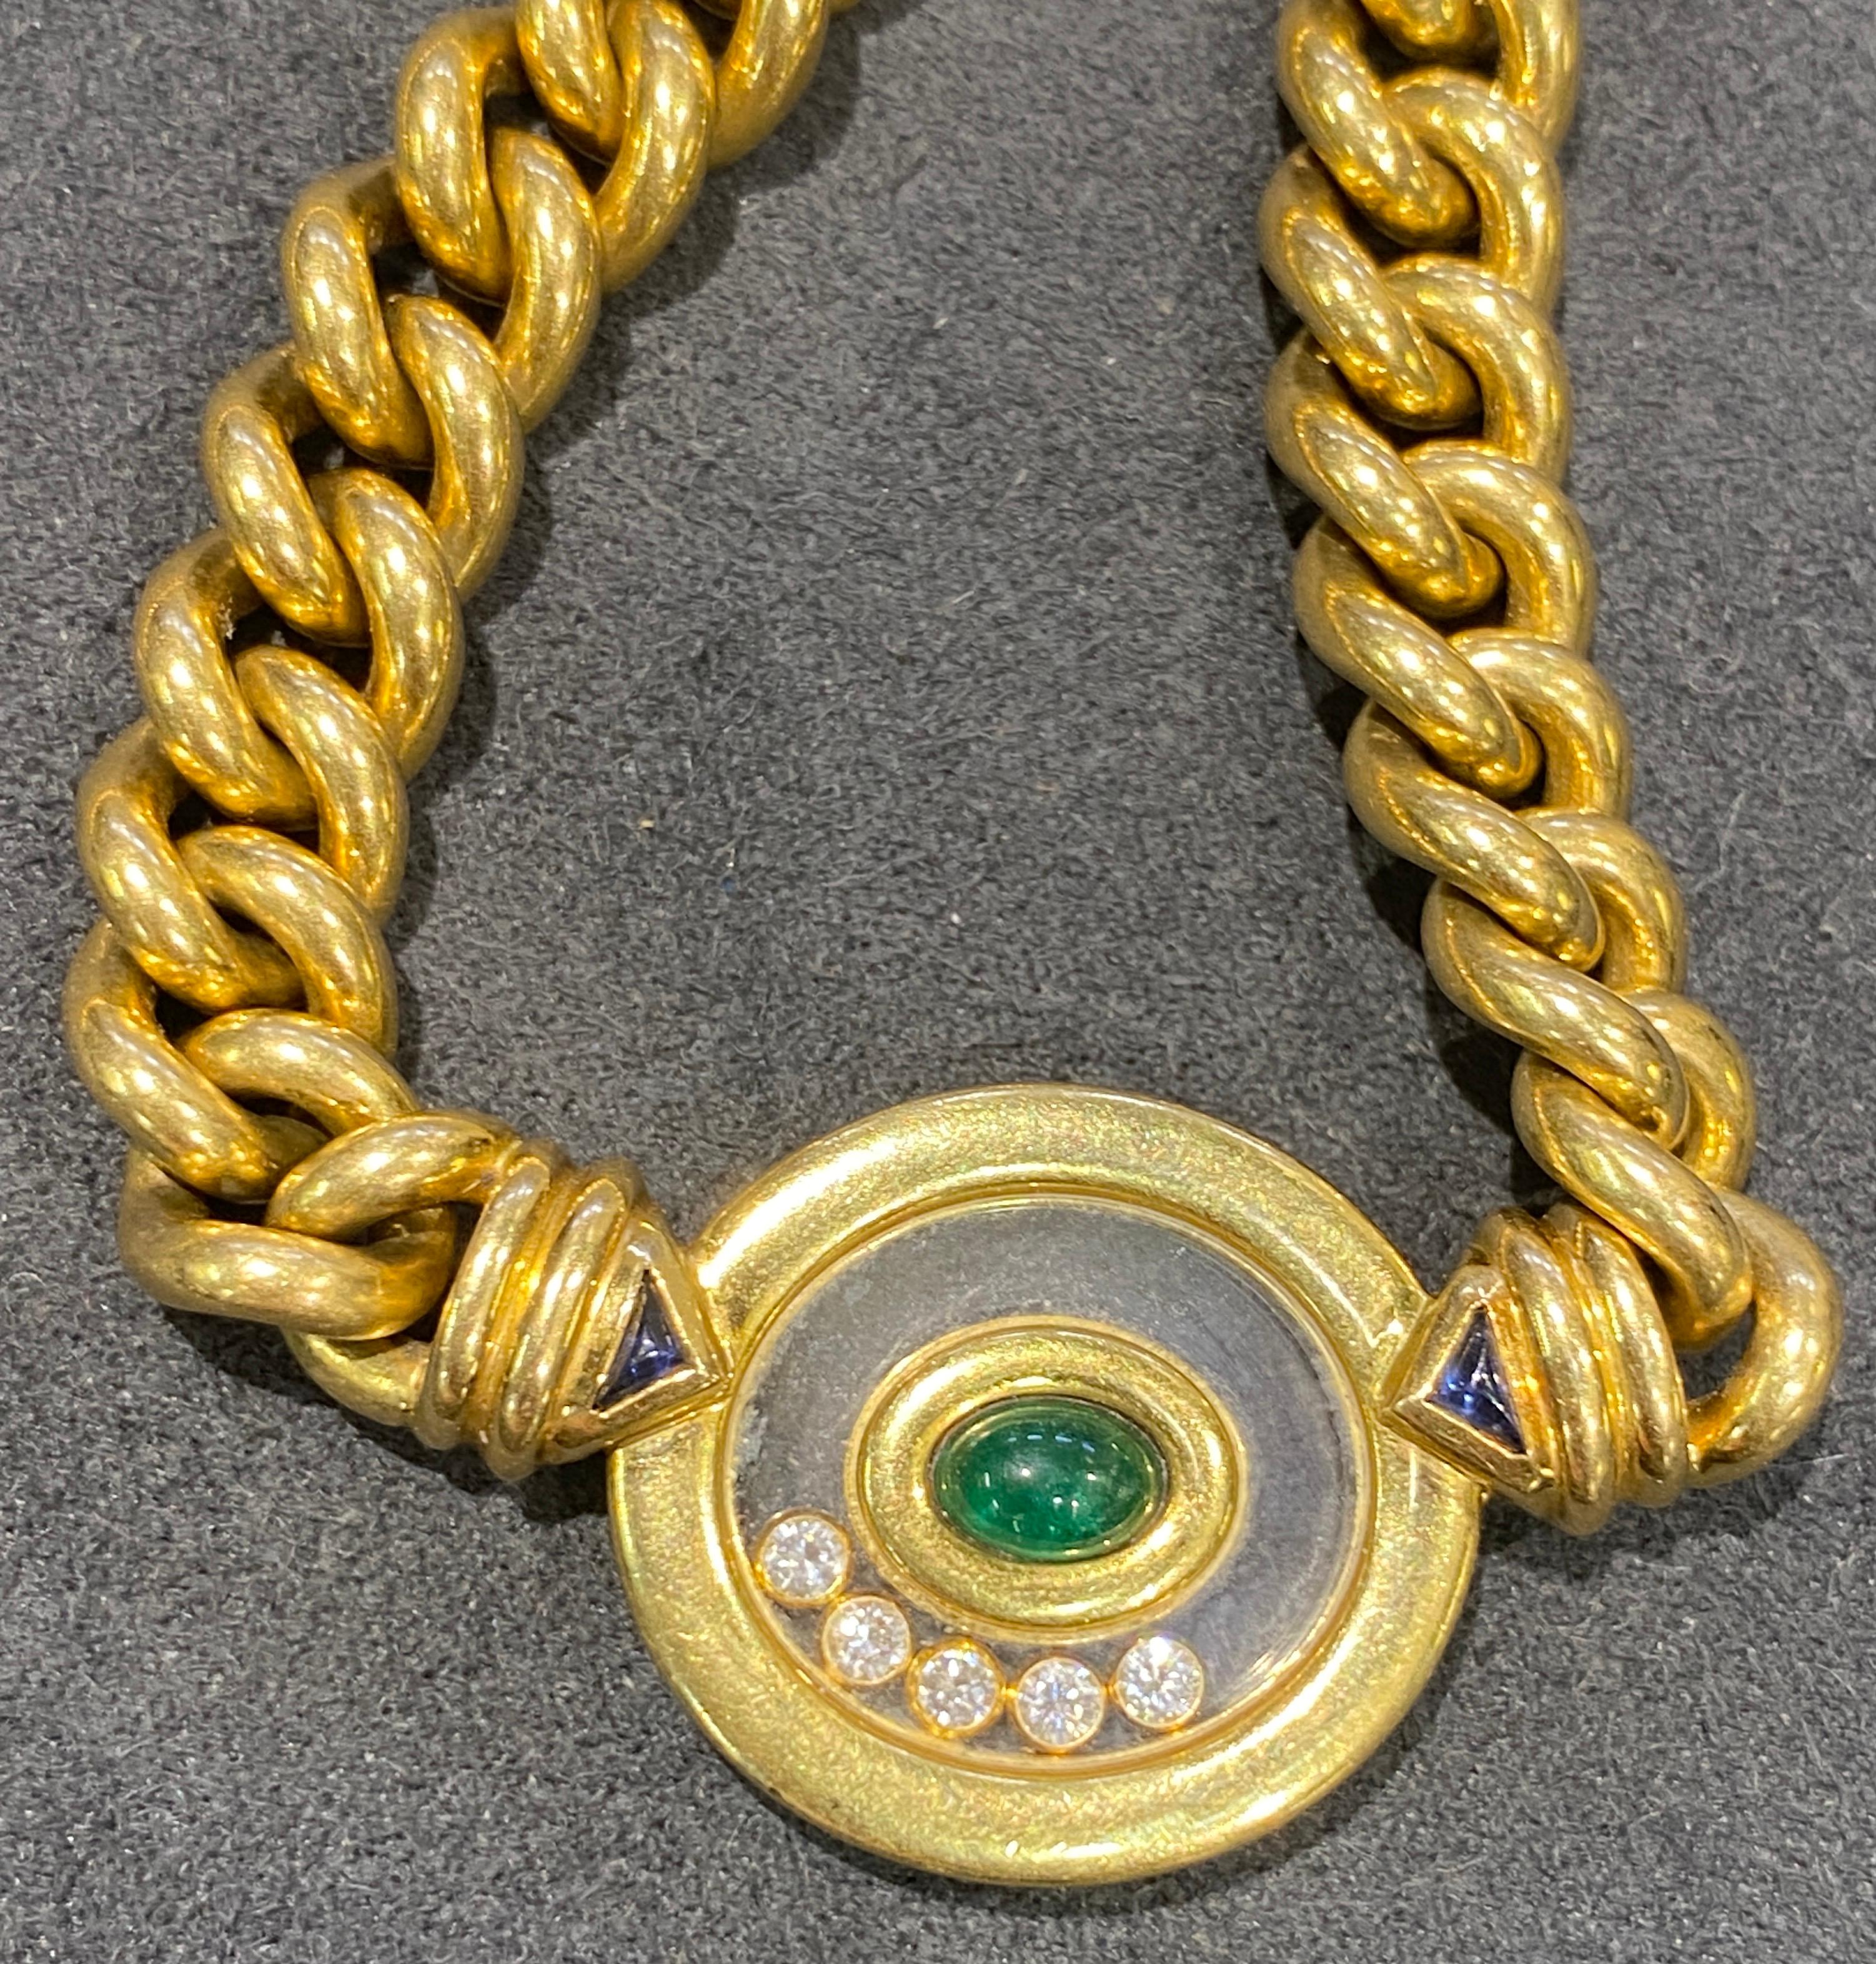 Modern 1980s Chopard 18k gold chain necklace with cabochon emerald and 5 Happy diamonds